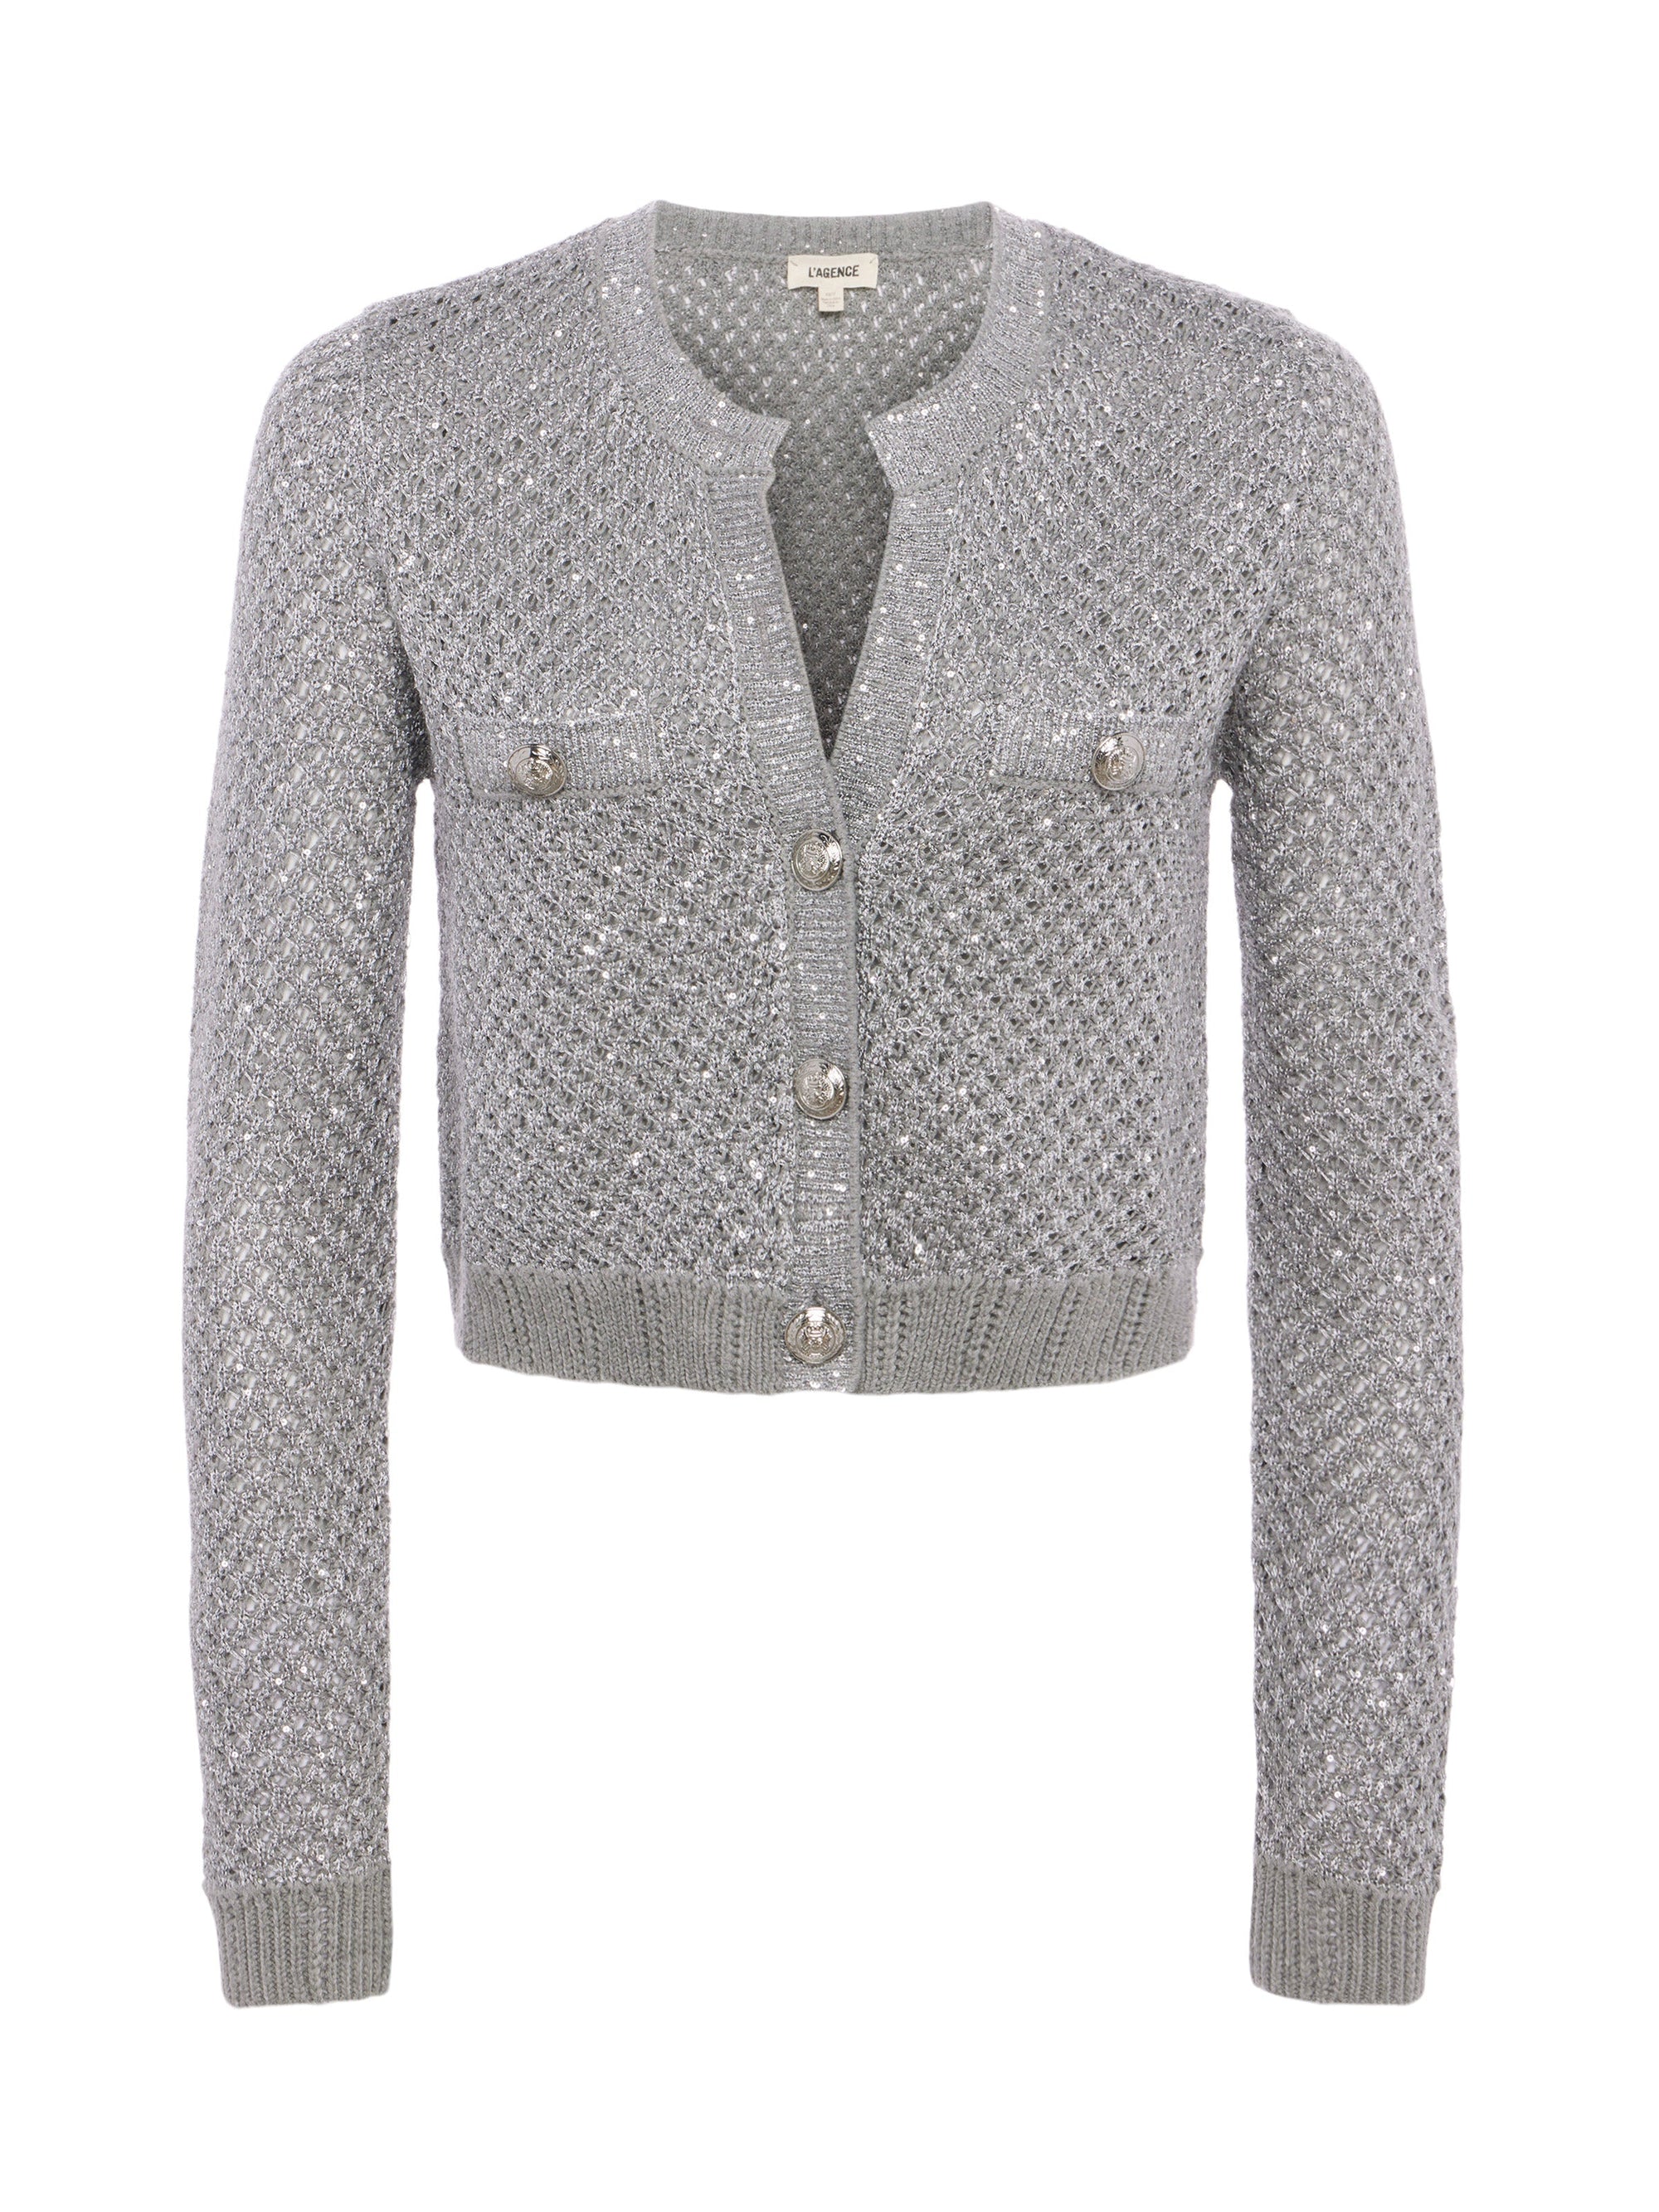 Blanca Sequin Crop Cardi by L'agence